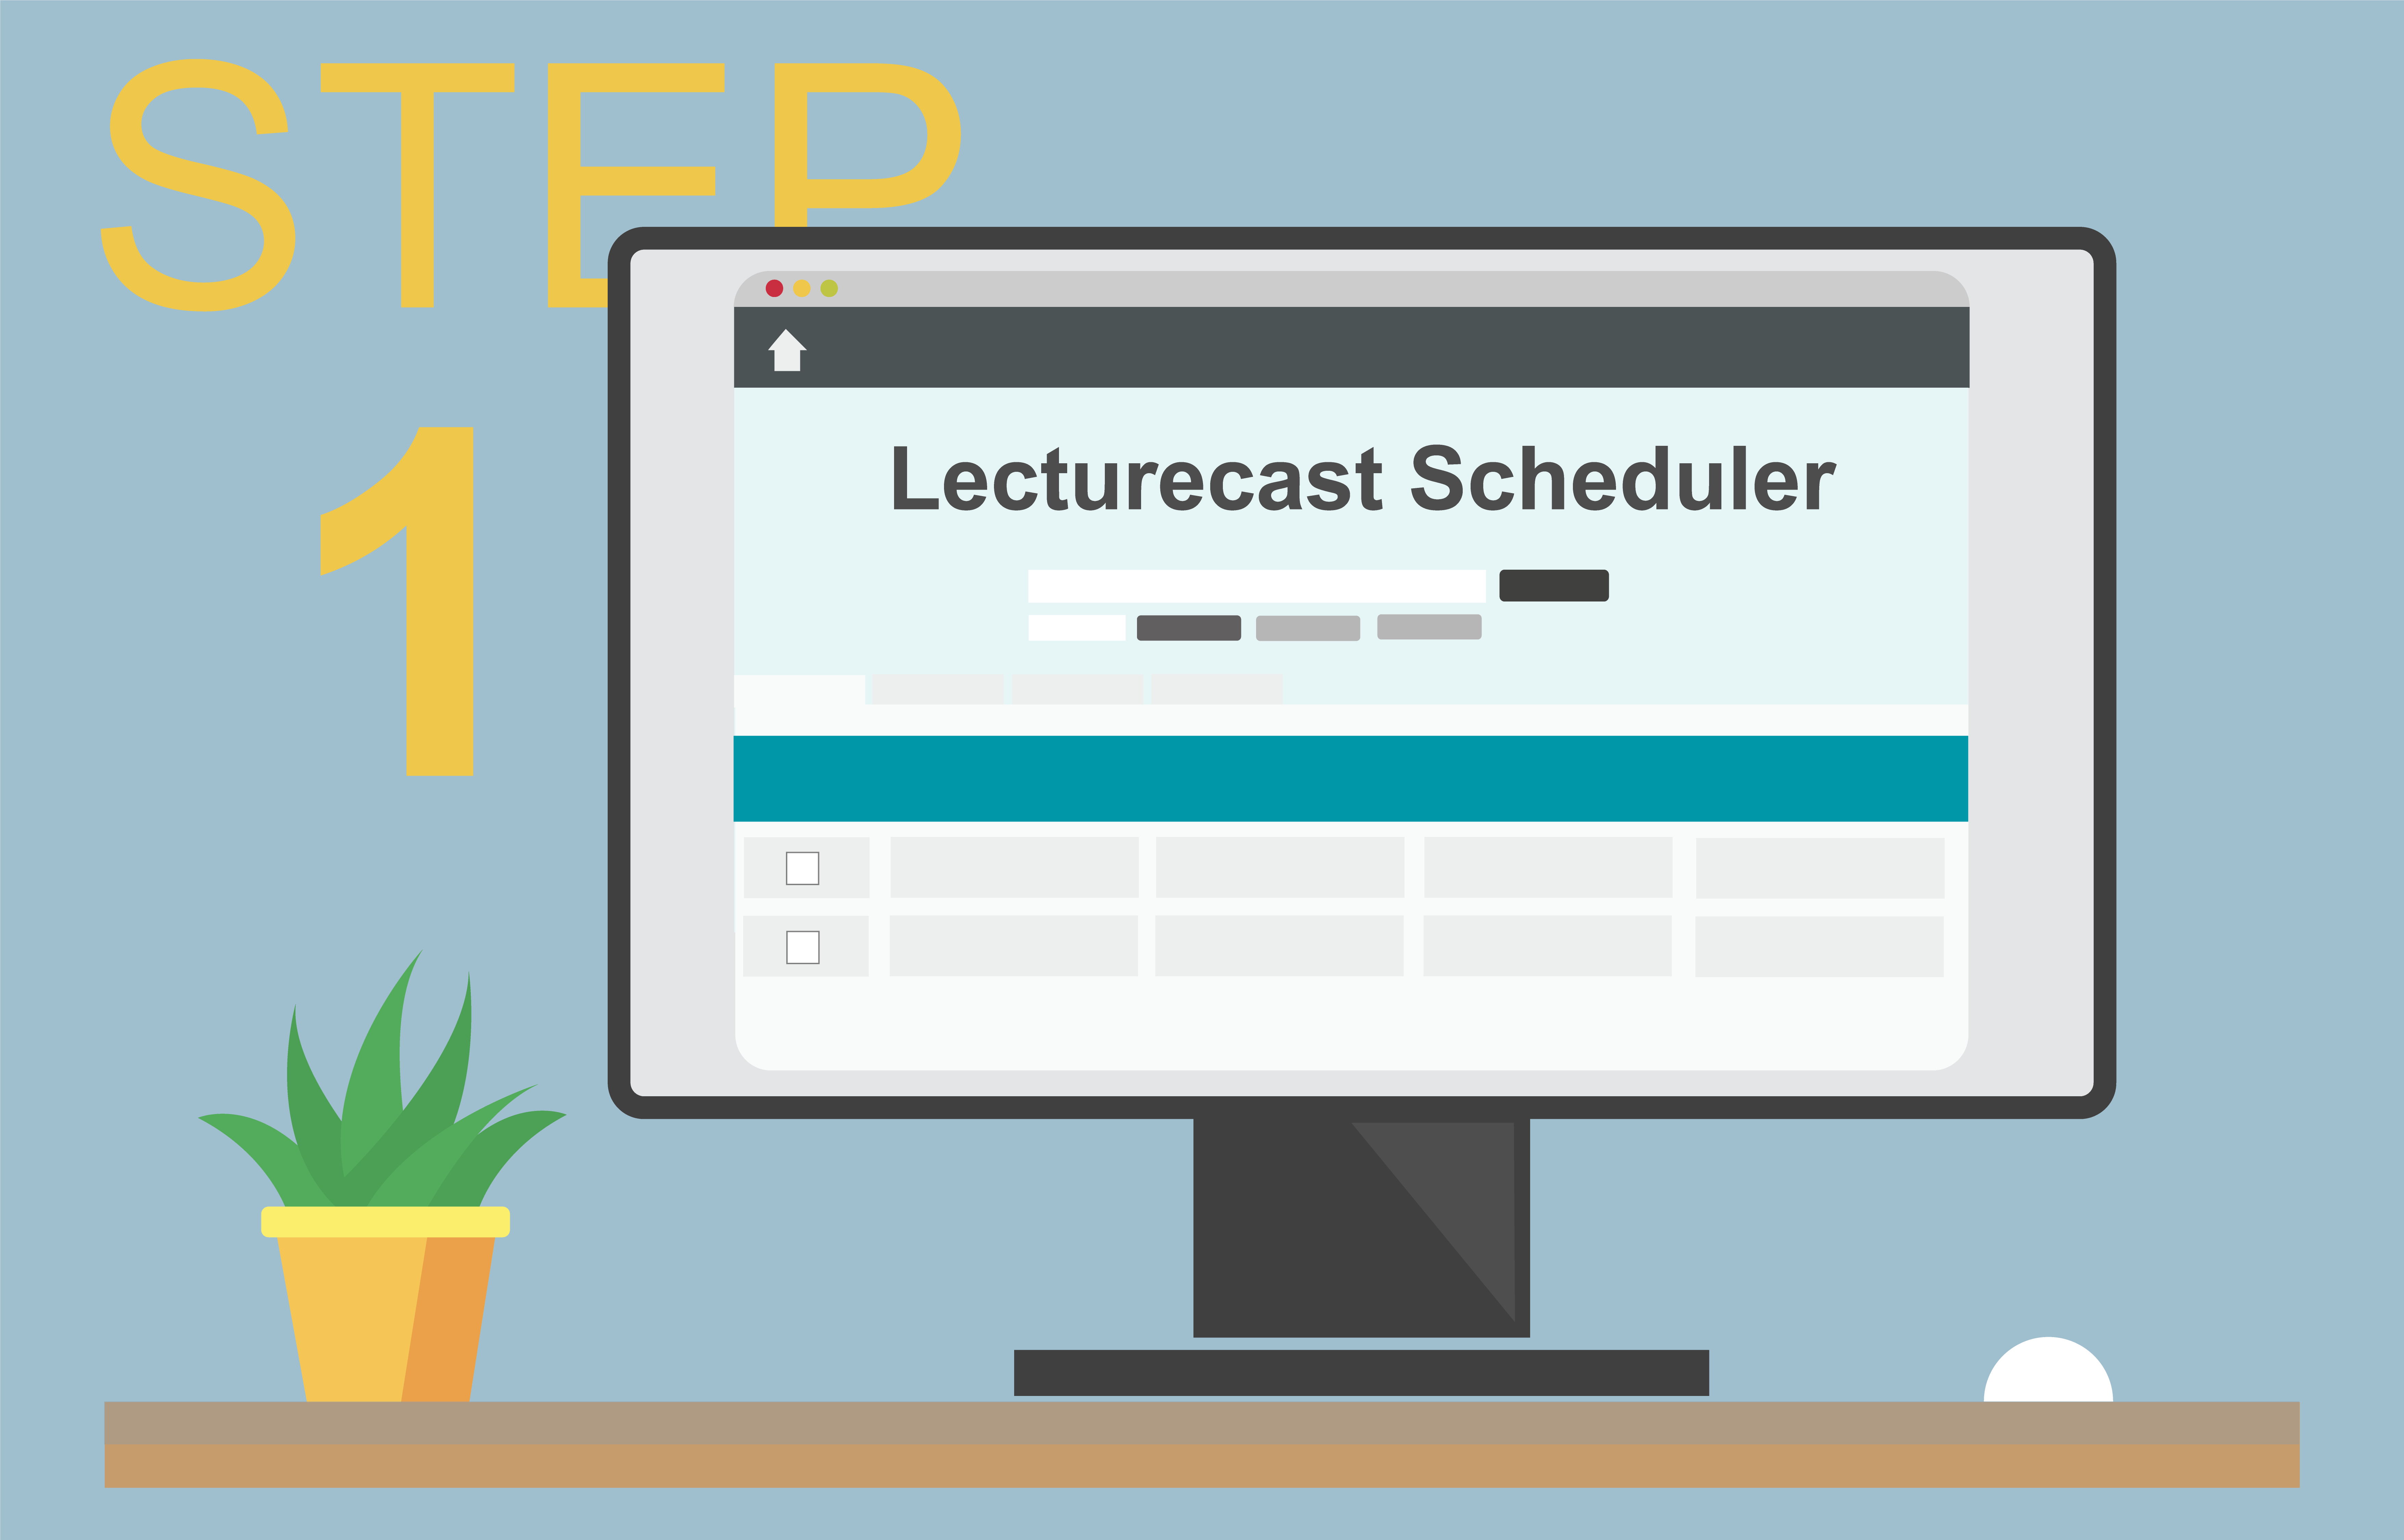 A illustration of a computer screen displaying the Lecturecast Scheduler webpage